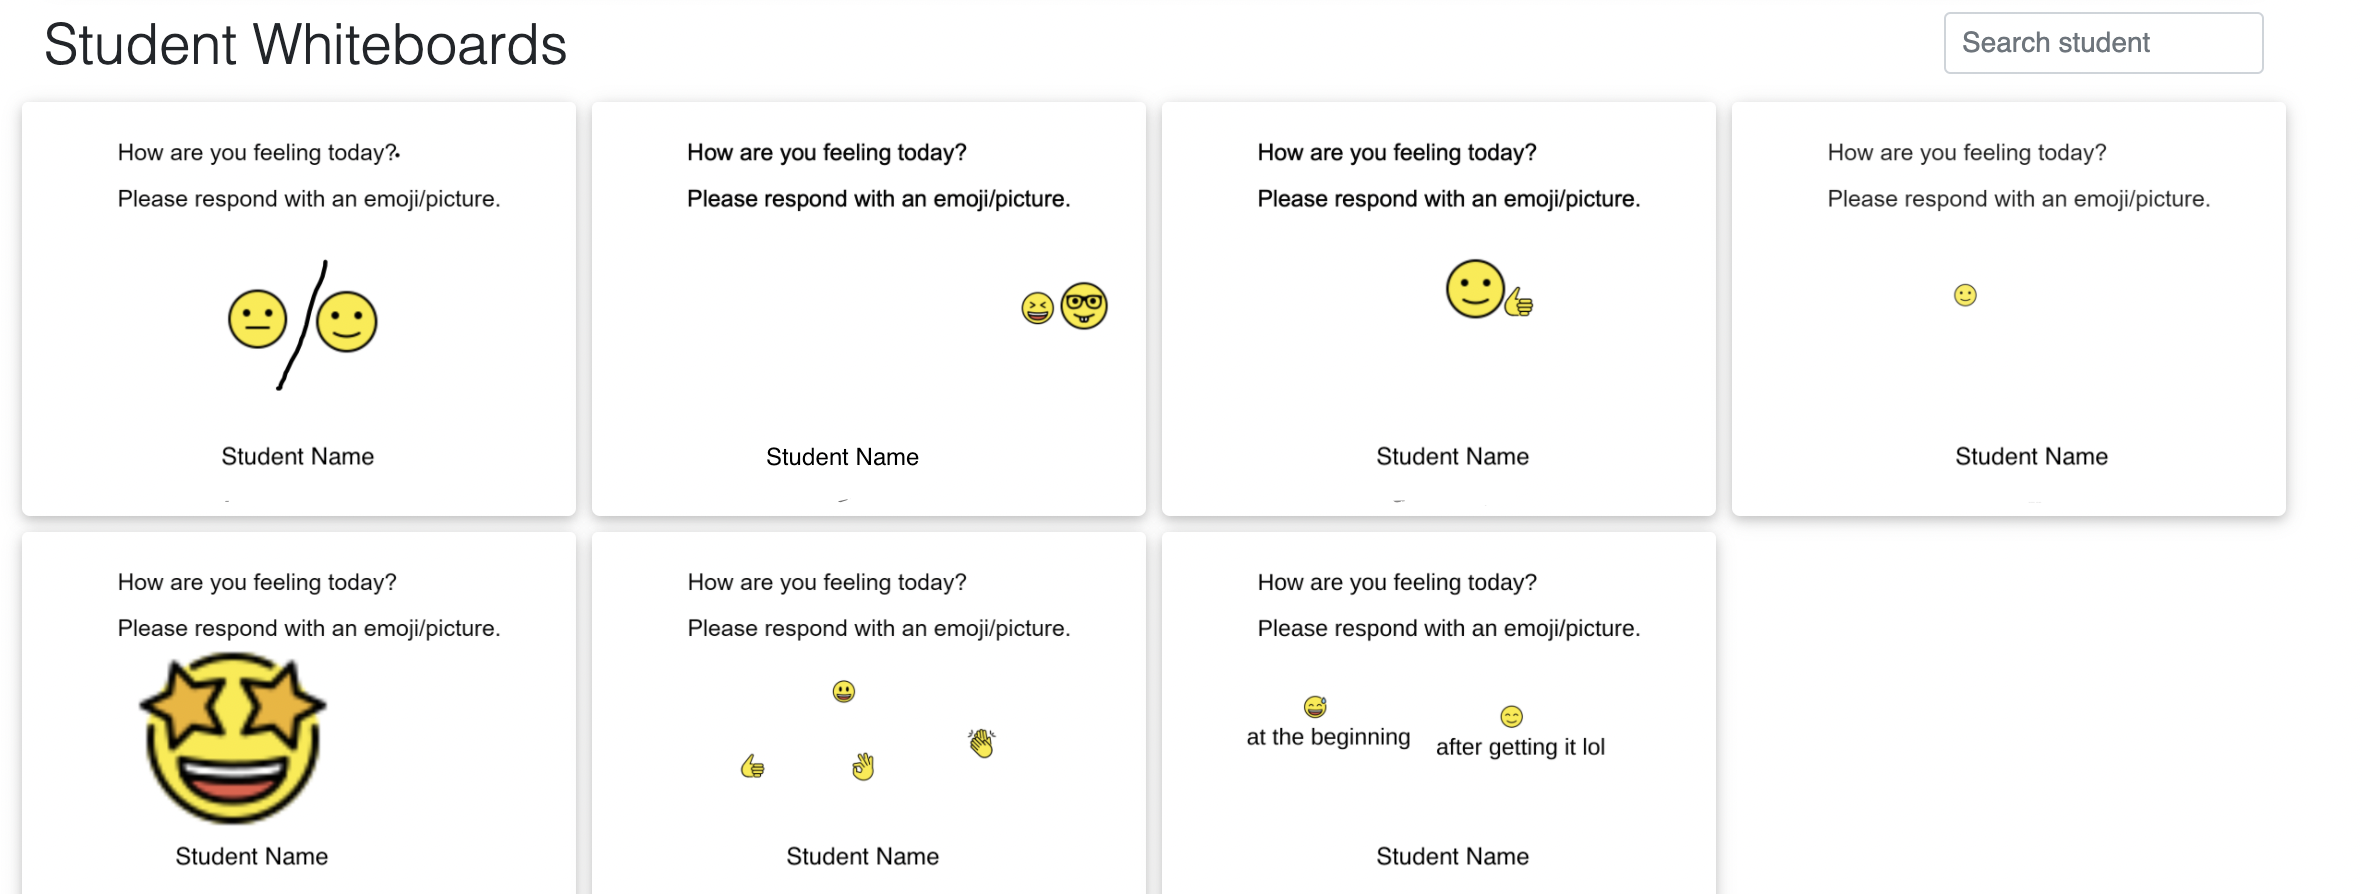 Picture 5 - Teacher view of students’ whiteboards as they reflect, students have annotated whiteboards using emojis